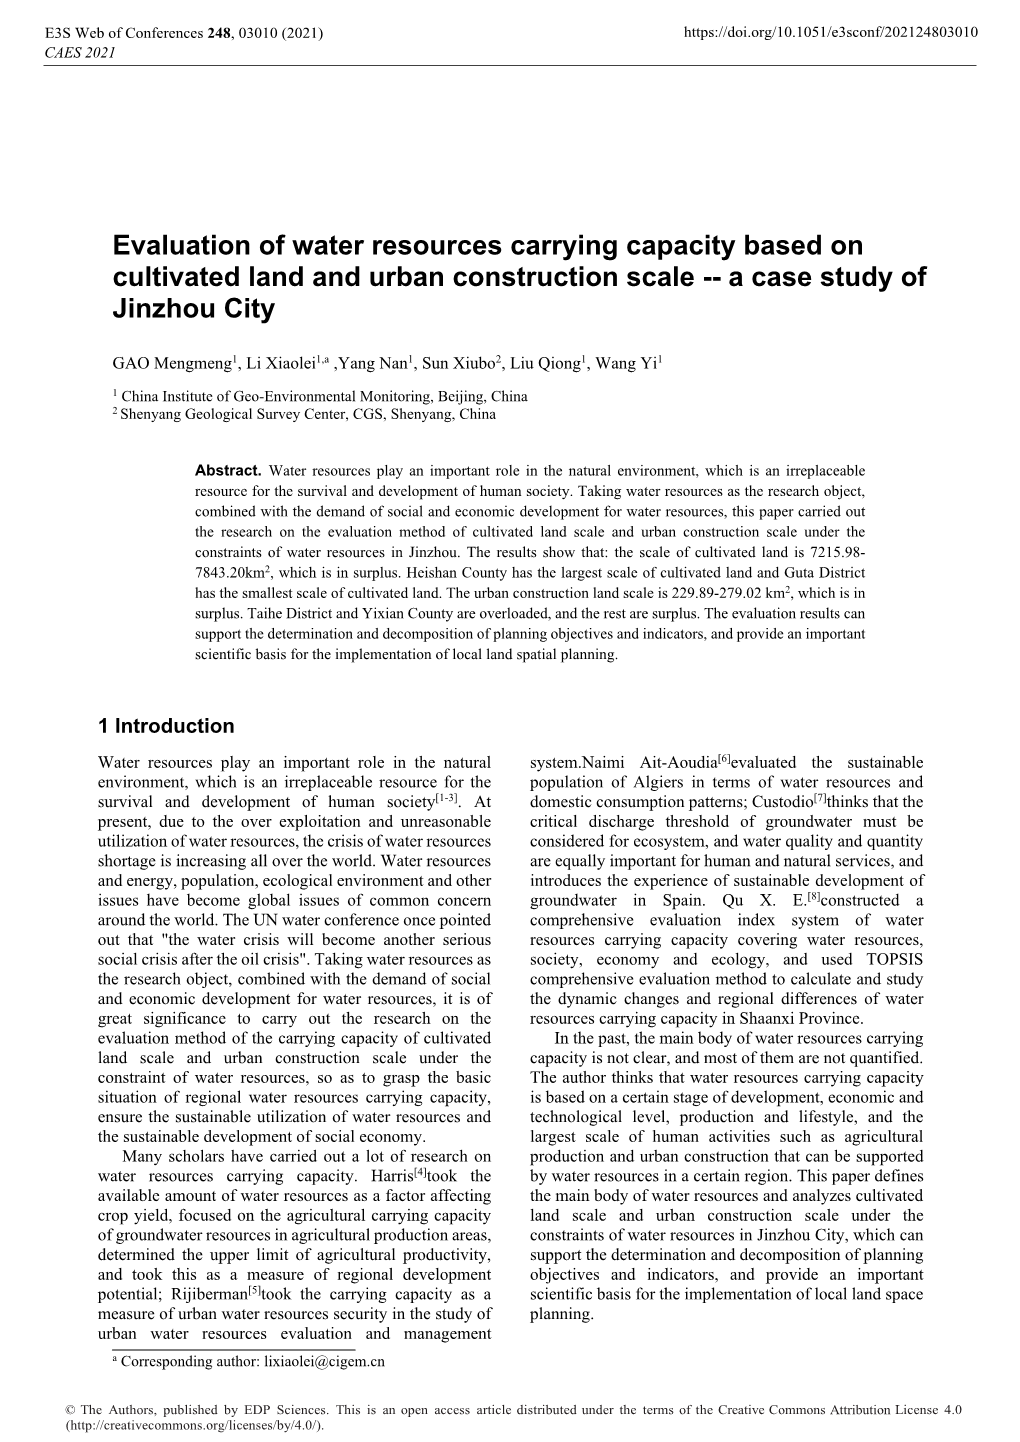 Evaluation of Water Resources Carrying Capacity Based on Cultivated Land and Urban Construction Scale -- a Case Study of Jinzhou City